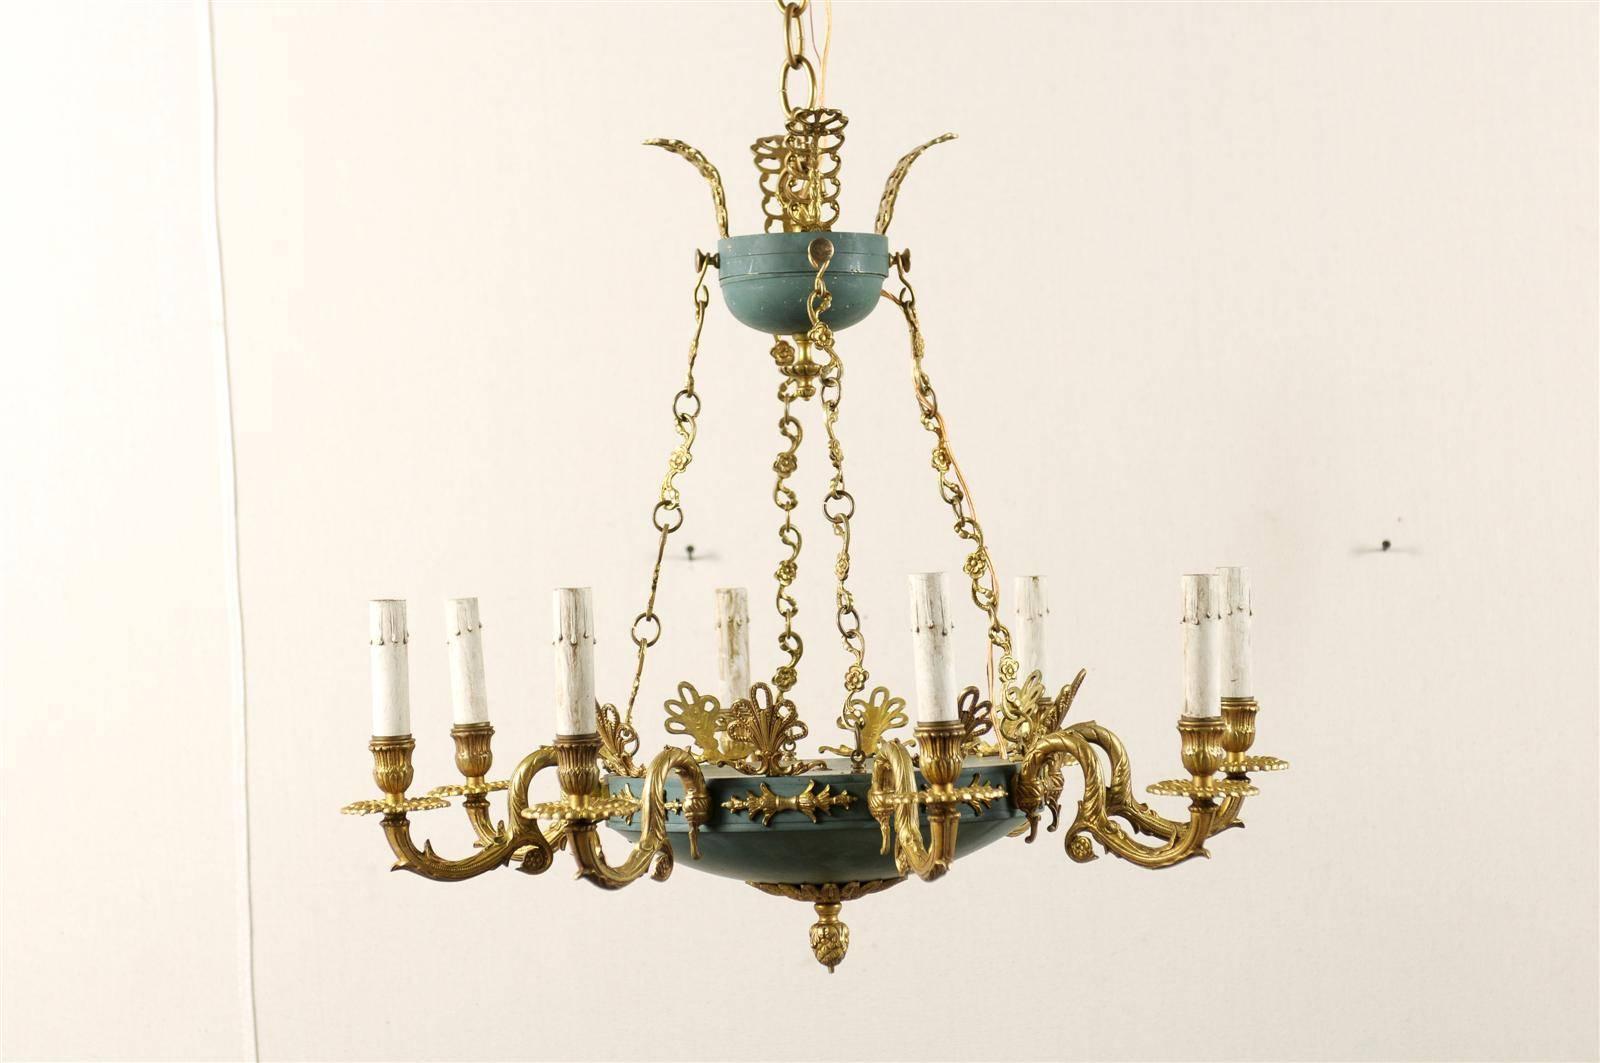 A Swedish Empire style eight-light chandelier from the 20th century. This elegant Empire style chandelier is made of brass and iron. It is teal and gold colored. The chain connectors feature floral motifs that are repeated in the chandelier's arms.